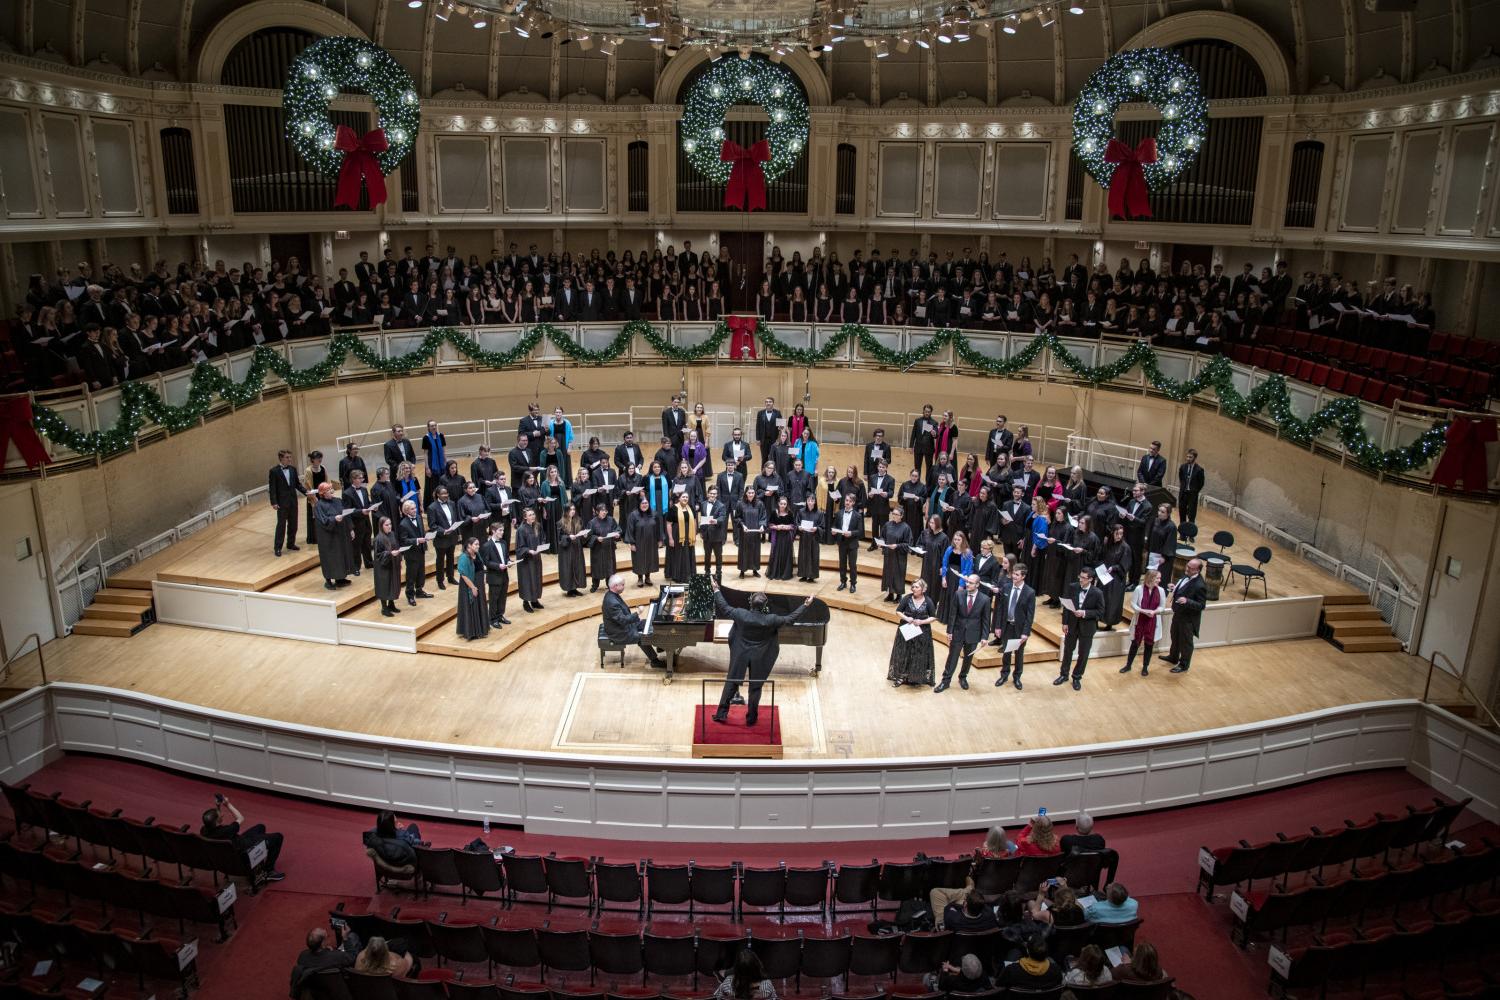 The <a href='http://98p.tianjingkeji.com'>bv伟德ios下载</a> Choir performs in the Chicago Symphony Hall.